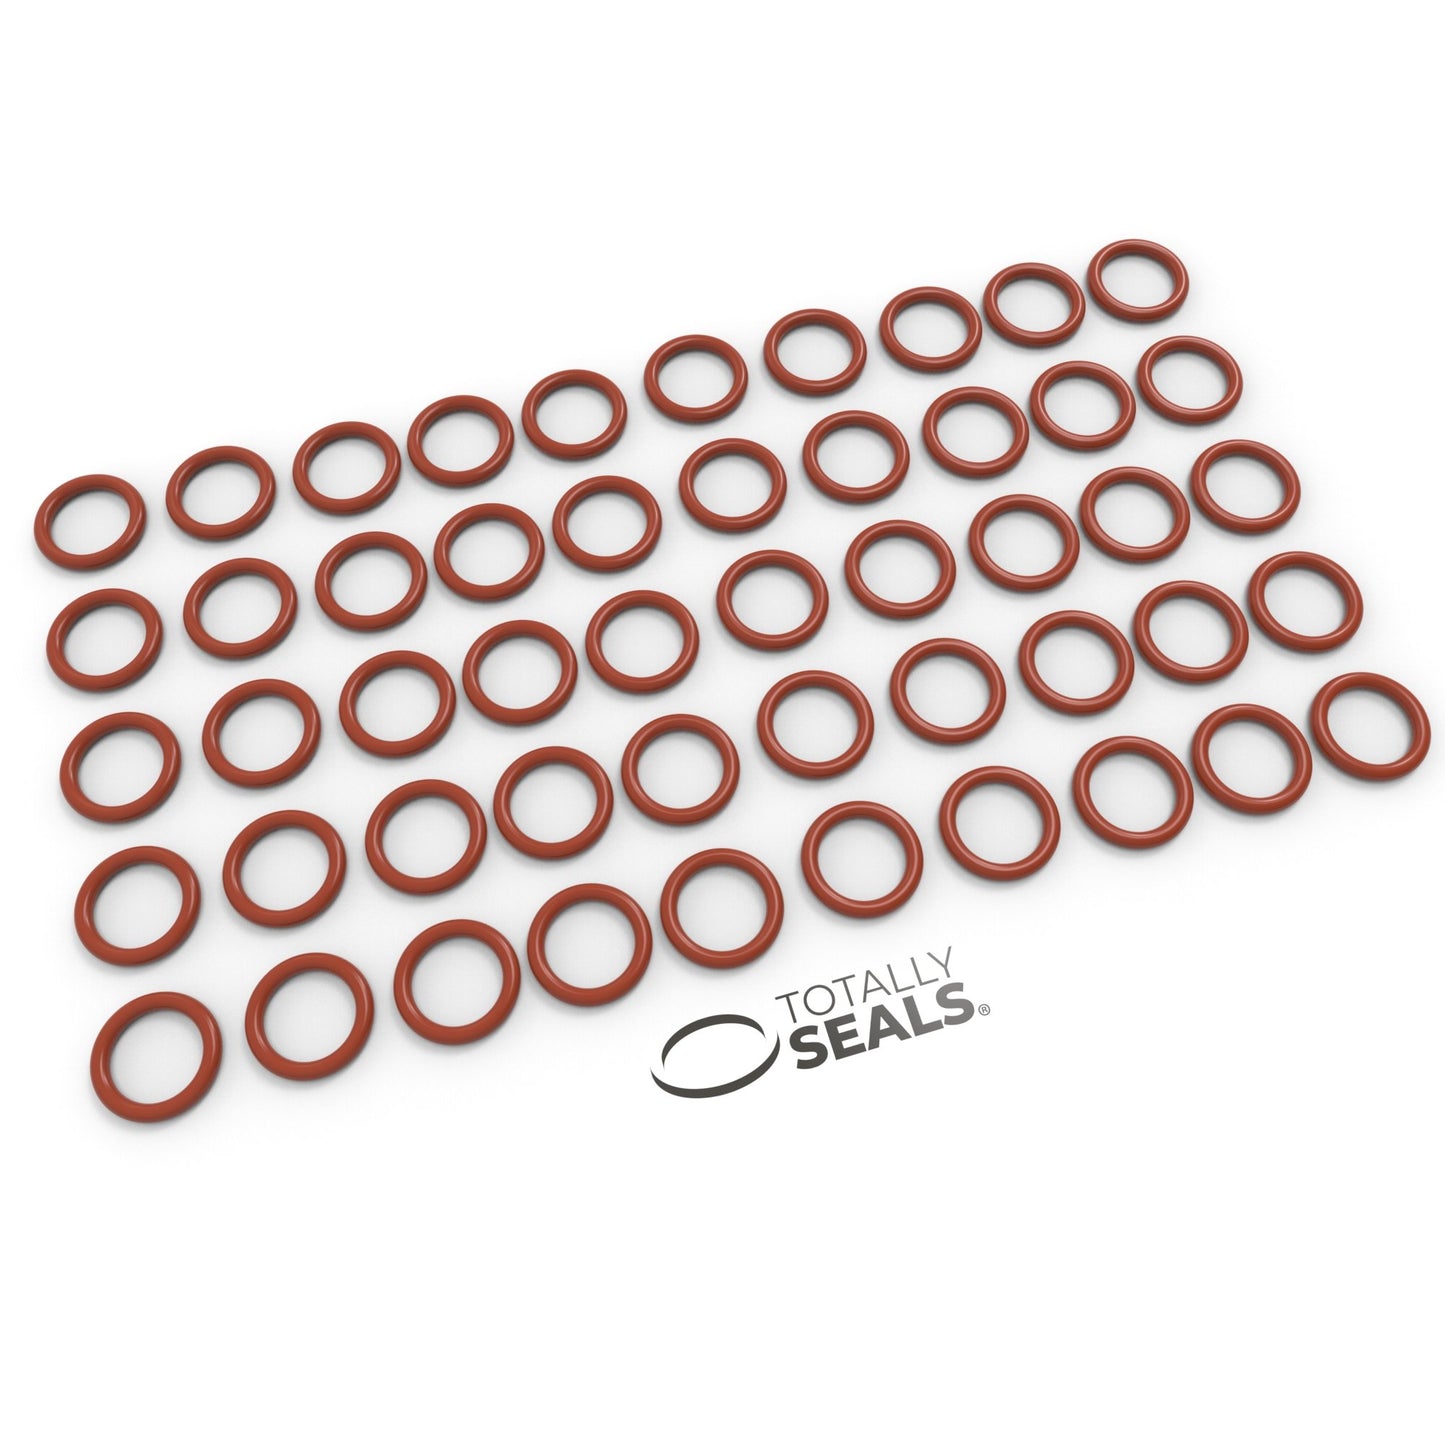 18mm x 2.5mm (23mm OD) Silicone O-Rings - Totally Seals®